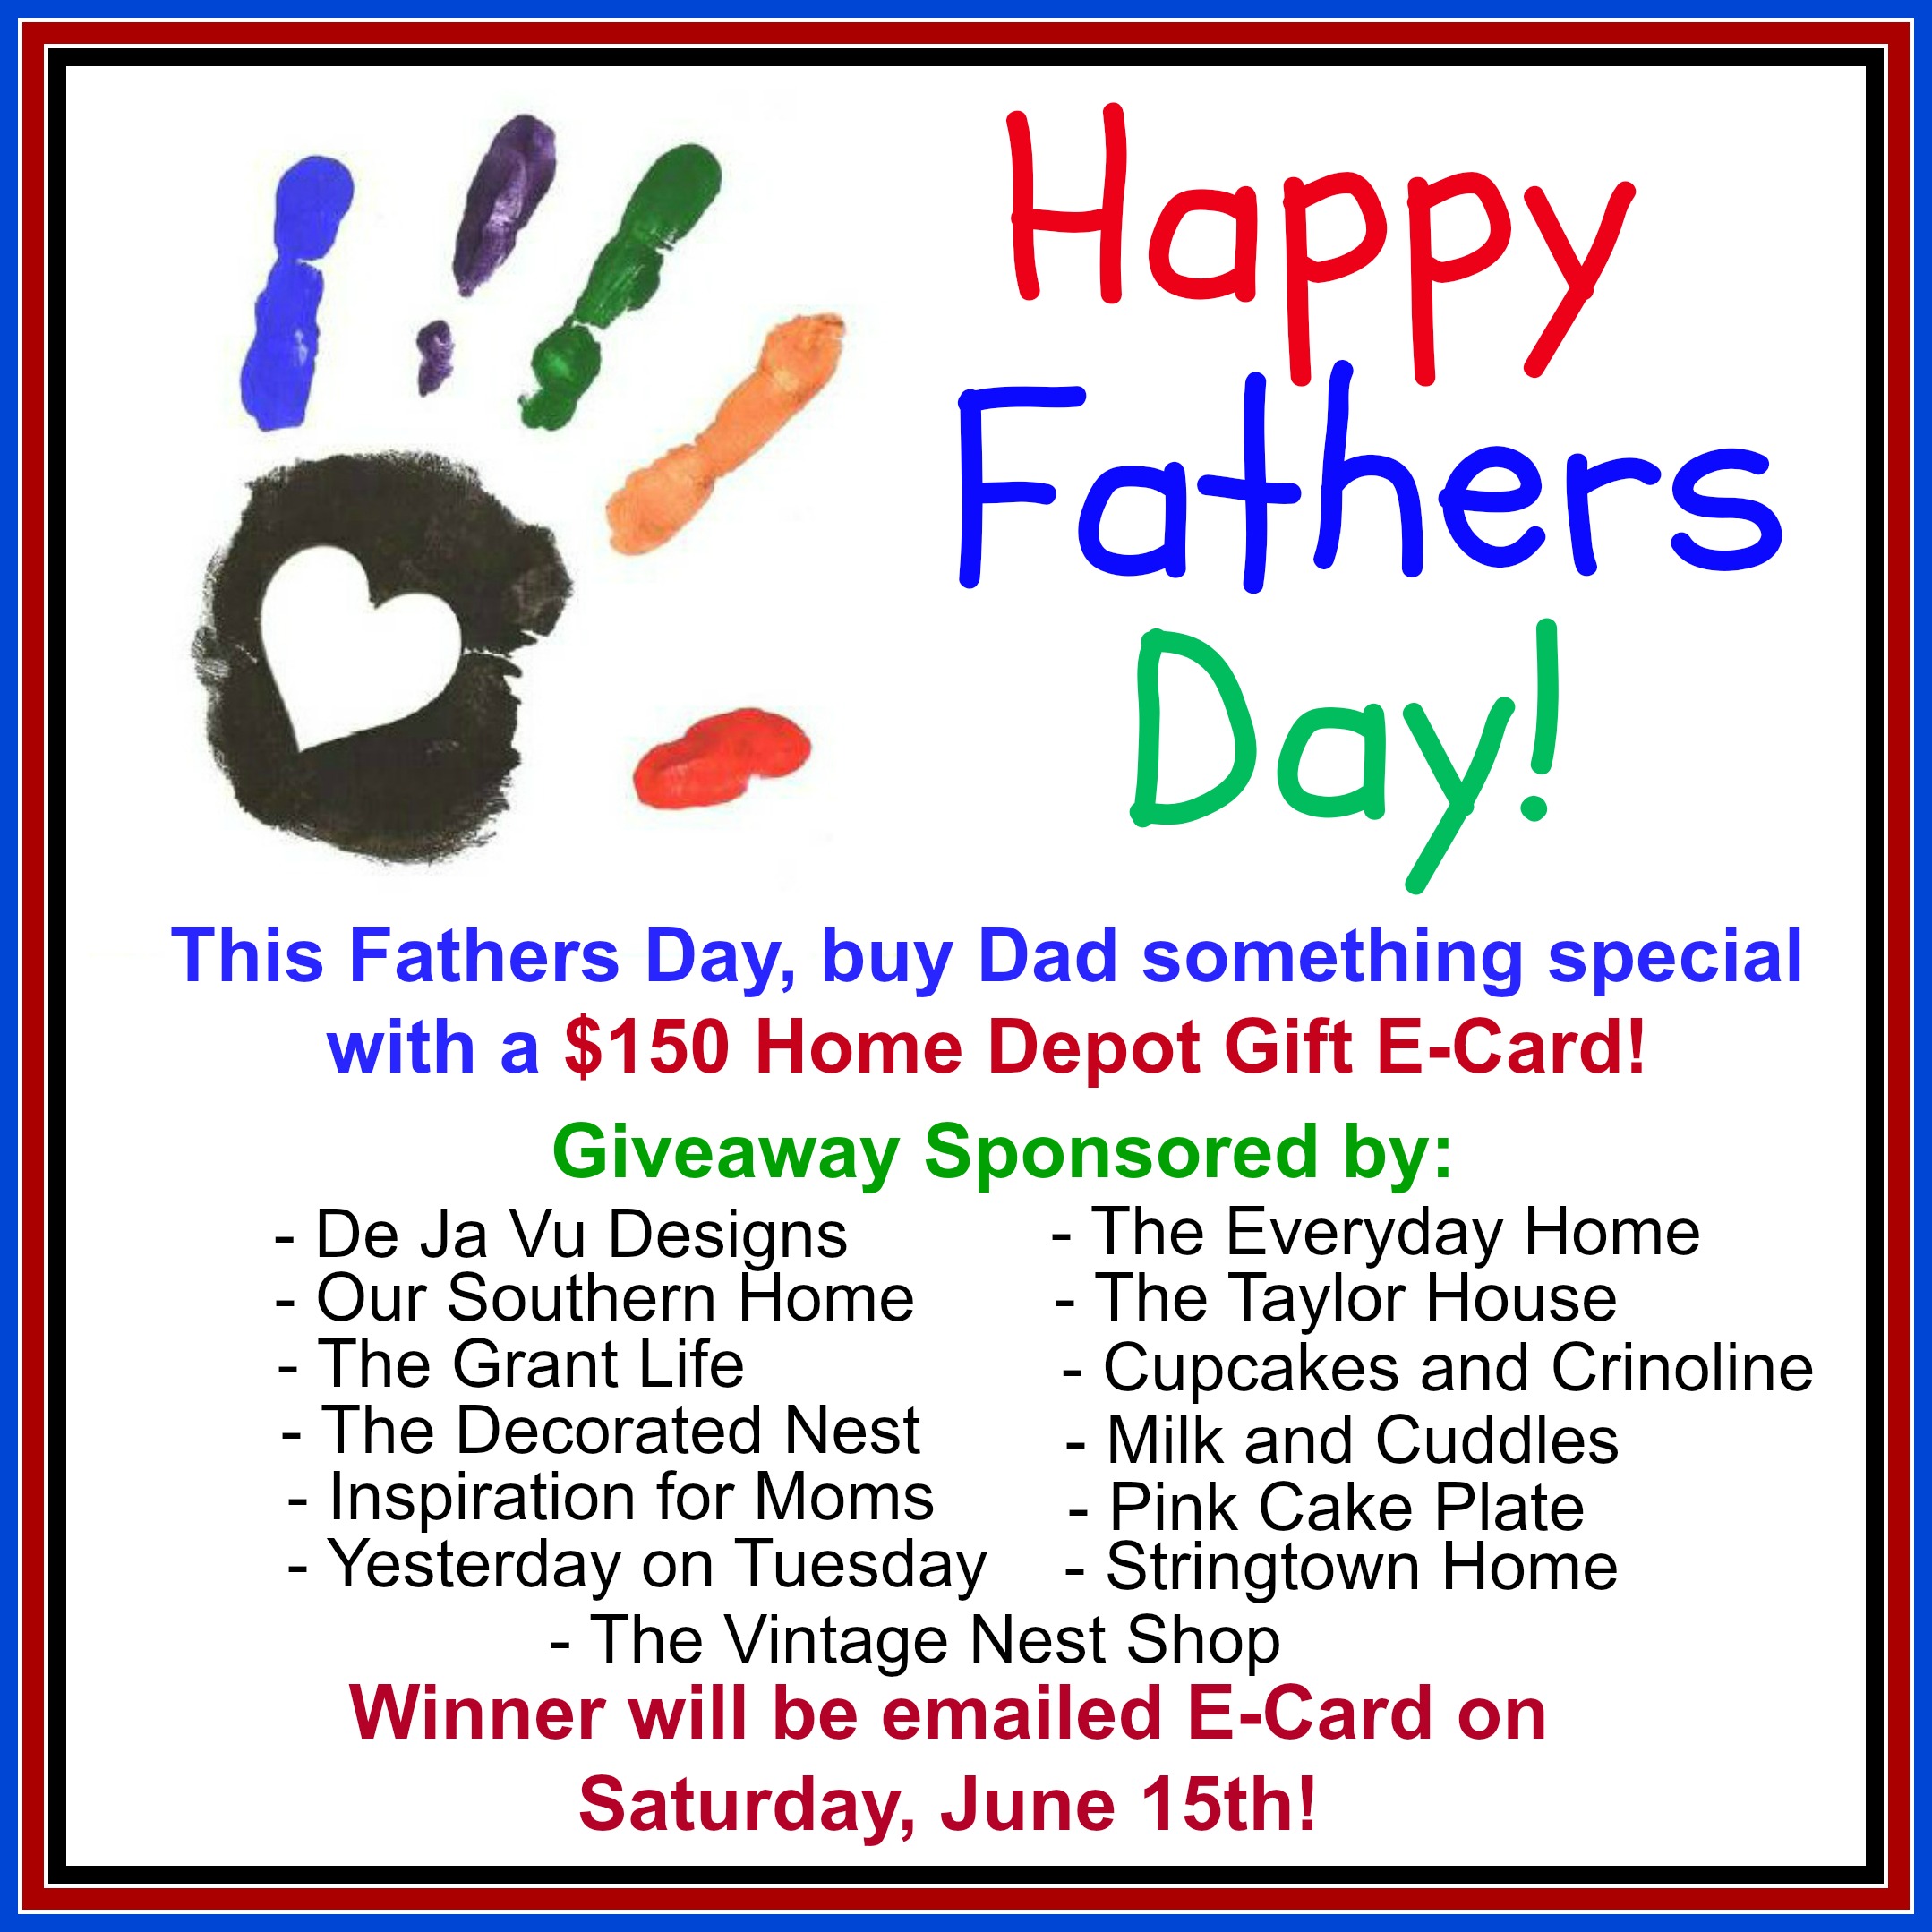 $150 Home Depot Gift Card Giveaway {Father’s Day}